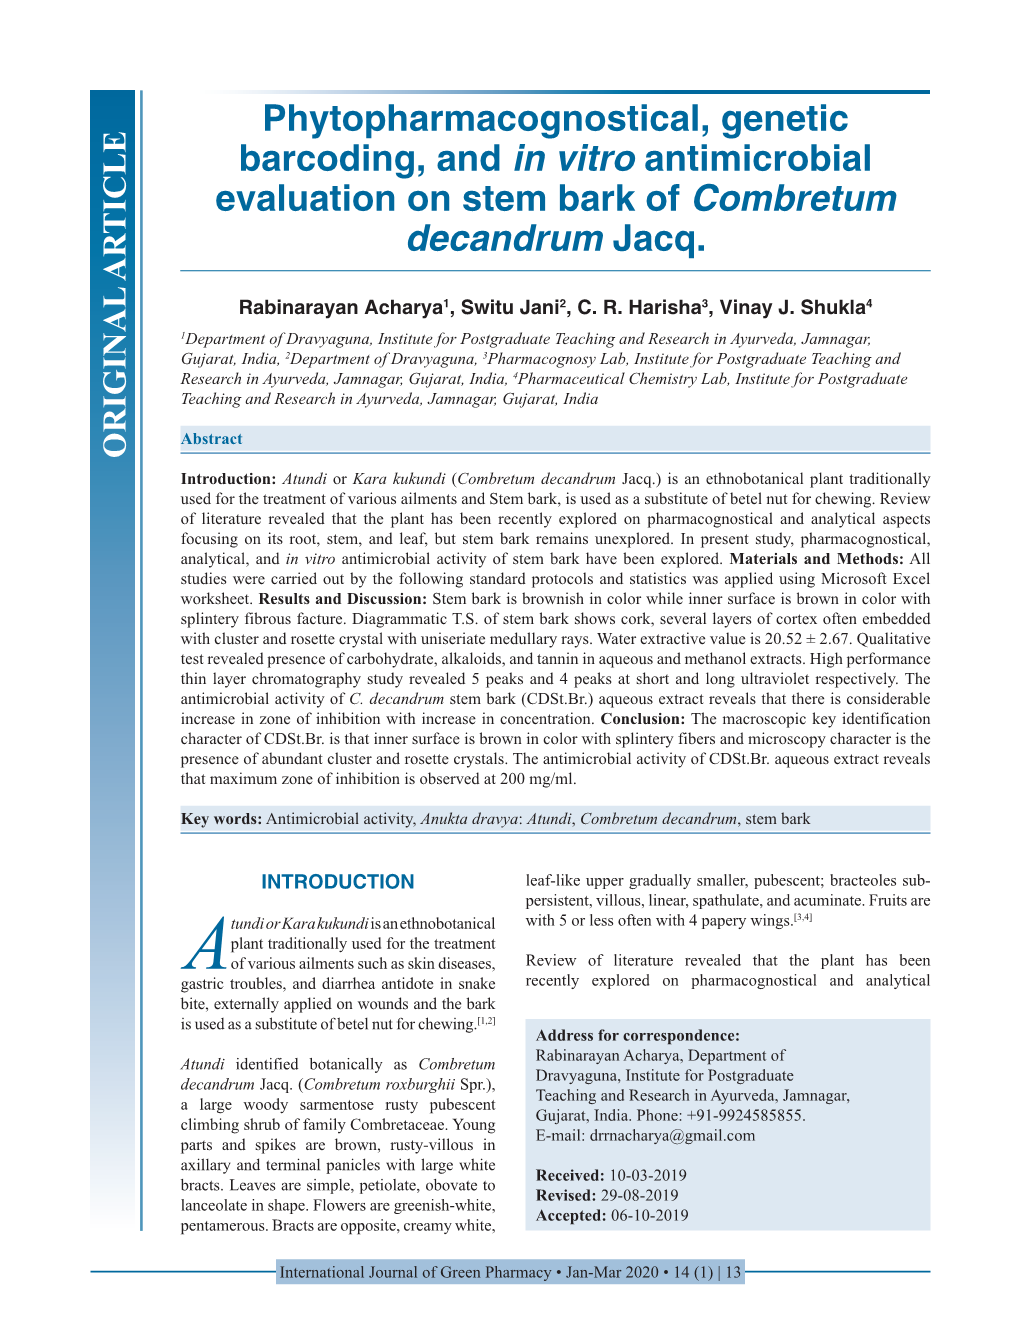 Phytopharmacognostical, Genetic Barcoding, and in Vitro Antimicrobial Evaluation on Stem Bark of Combretum Decandrum Jacq